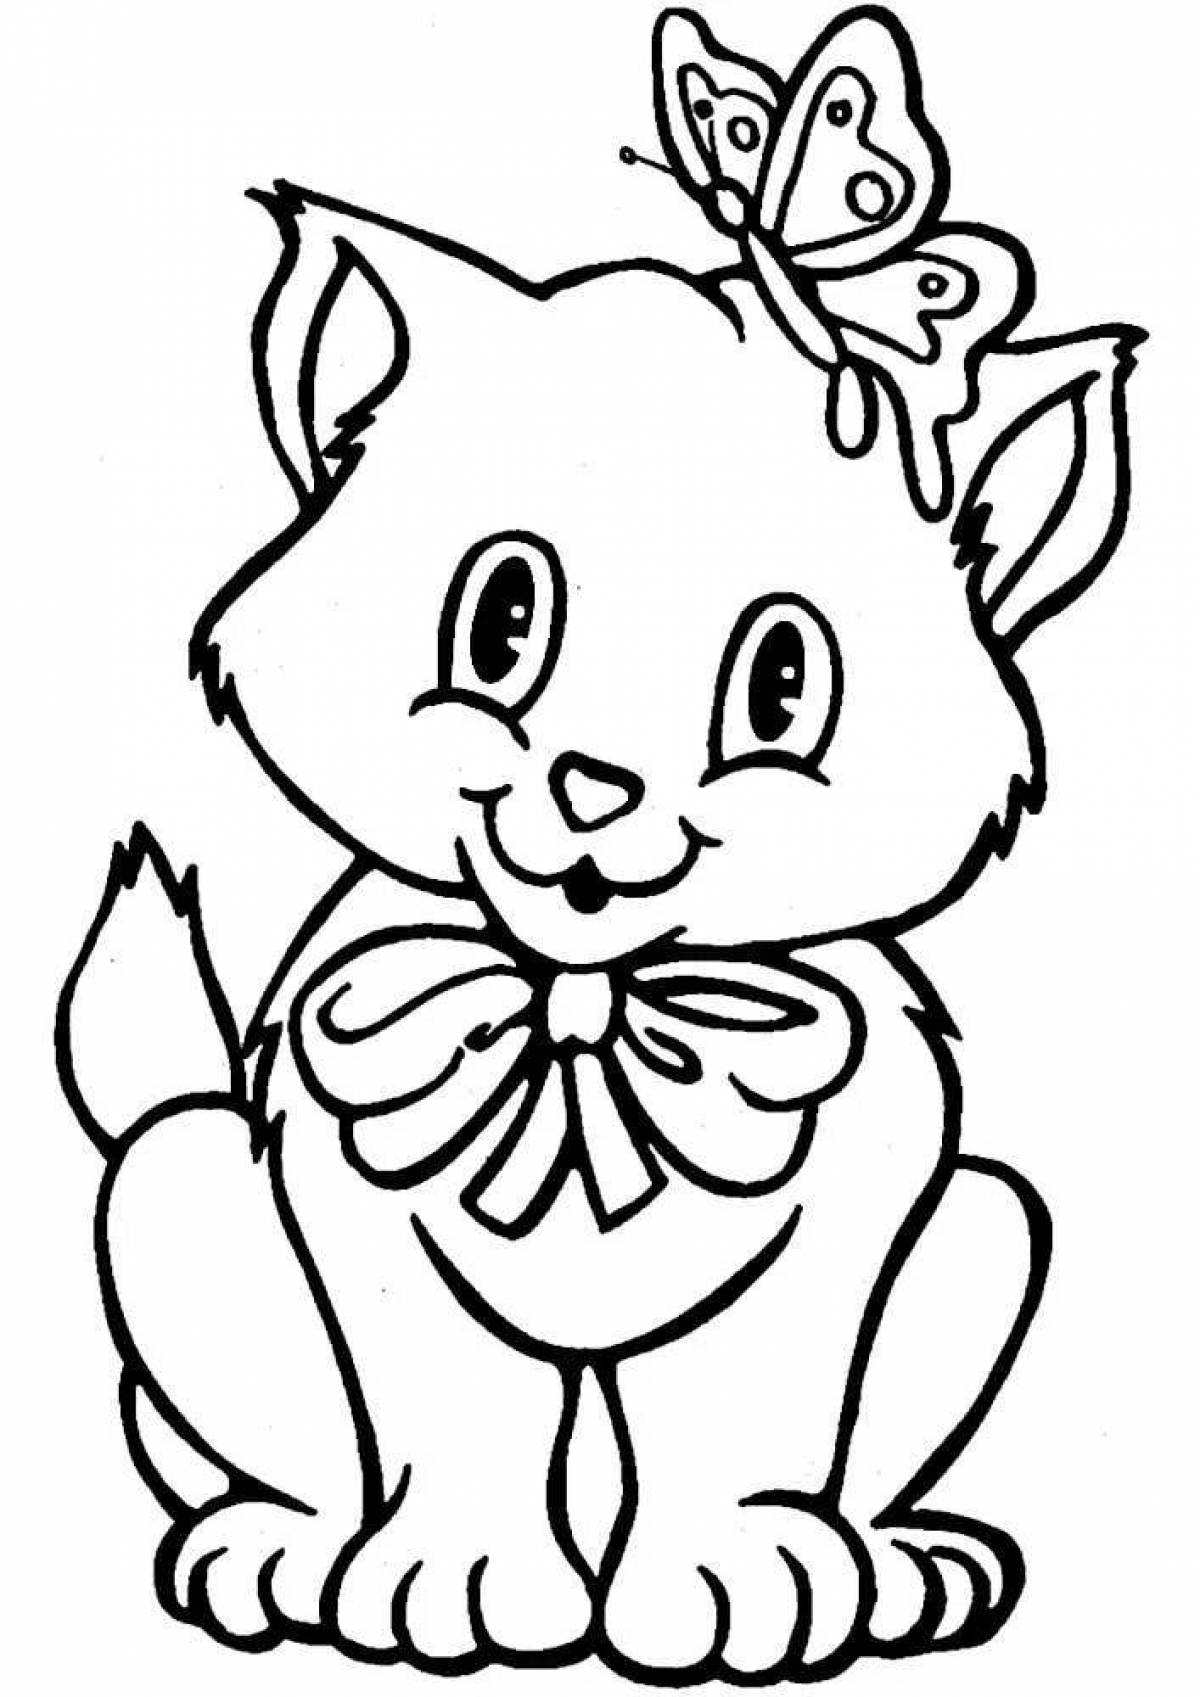 Coloring book bright cat with a bow